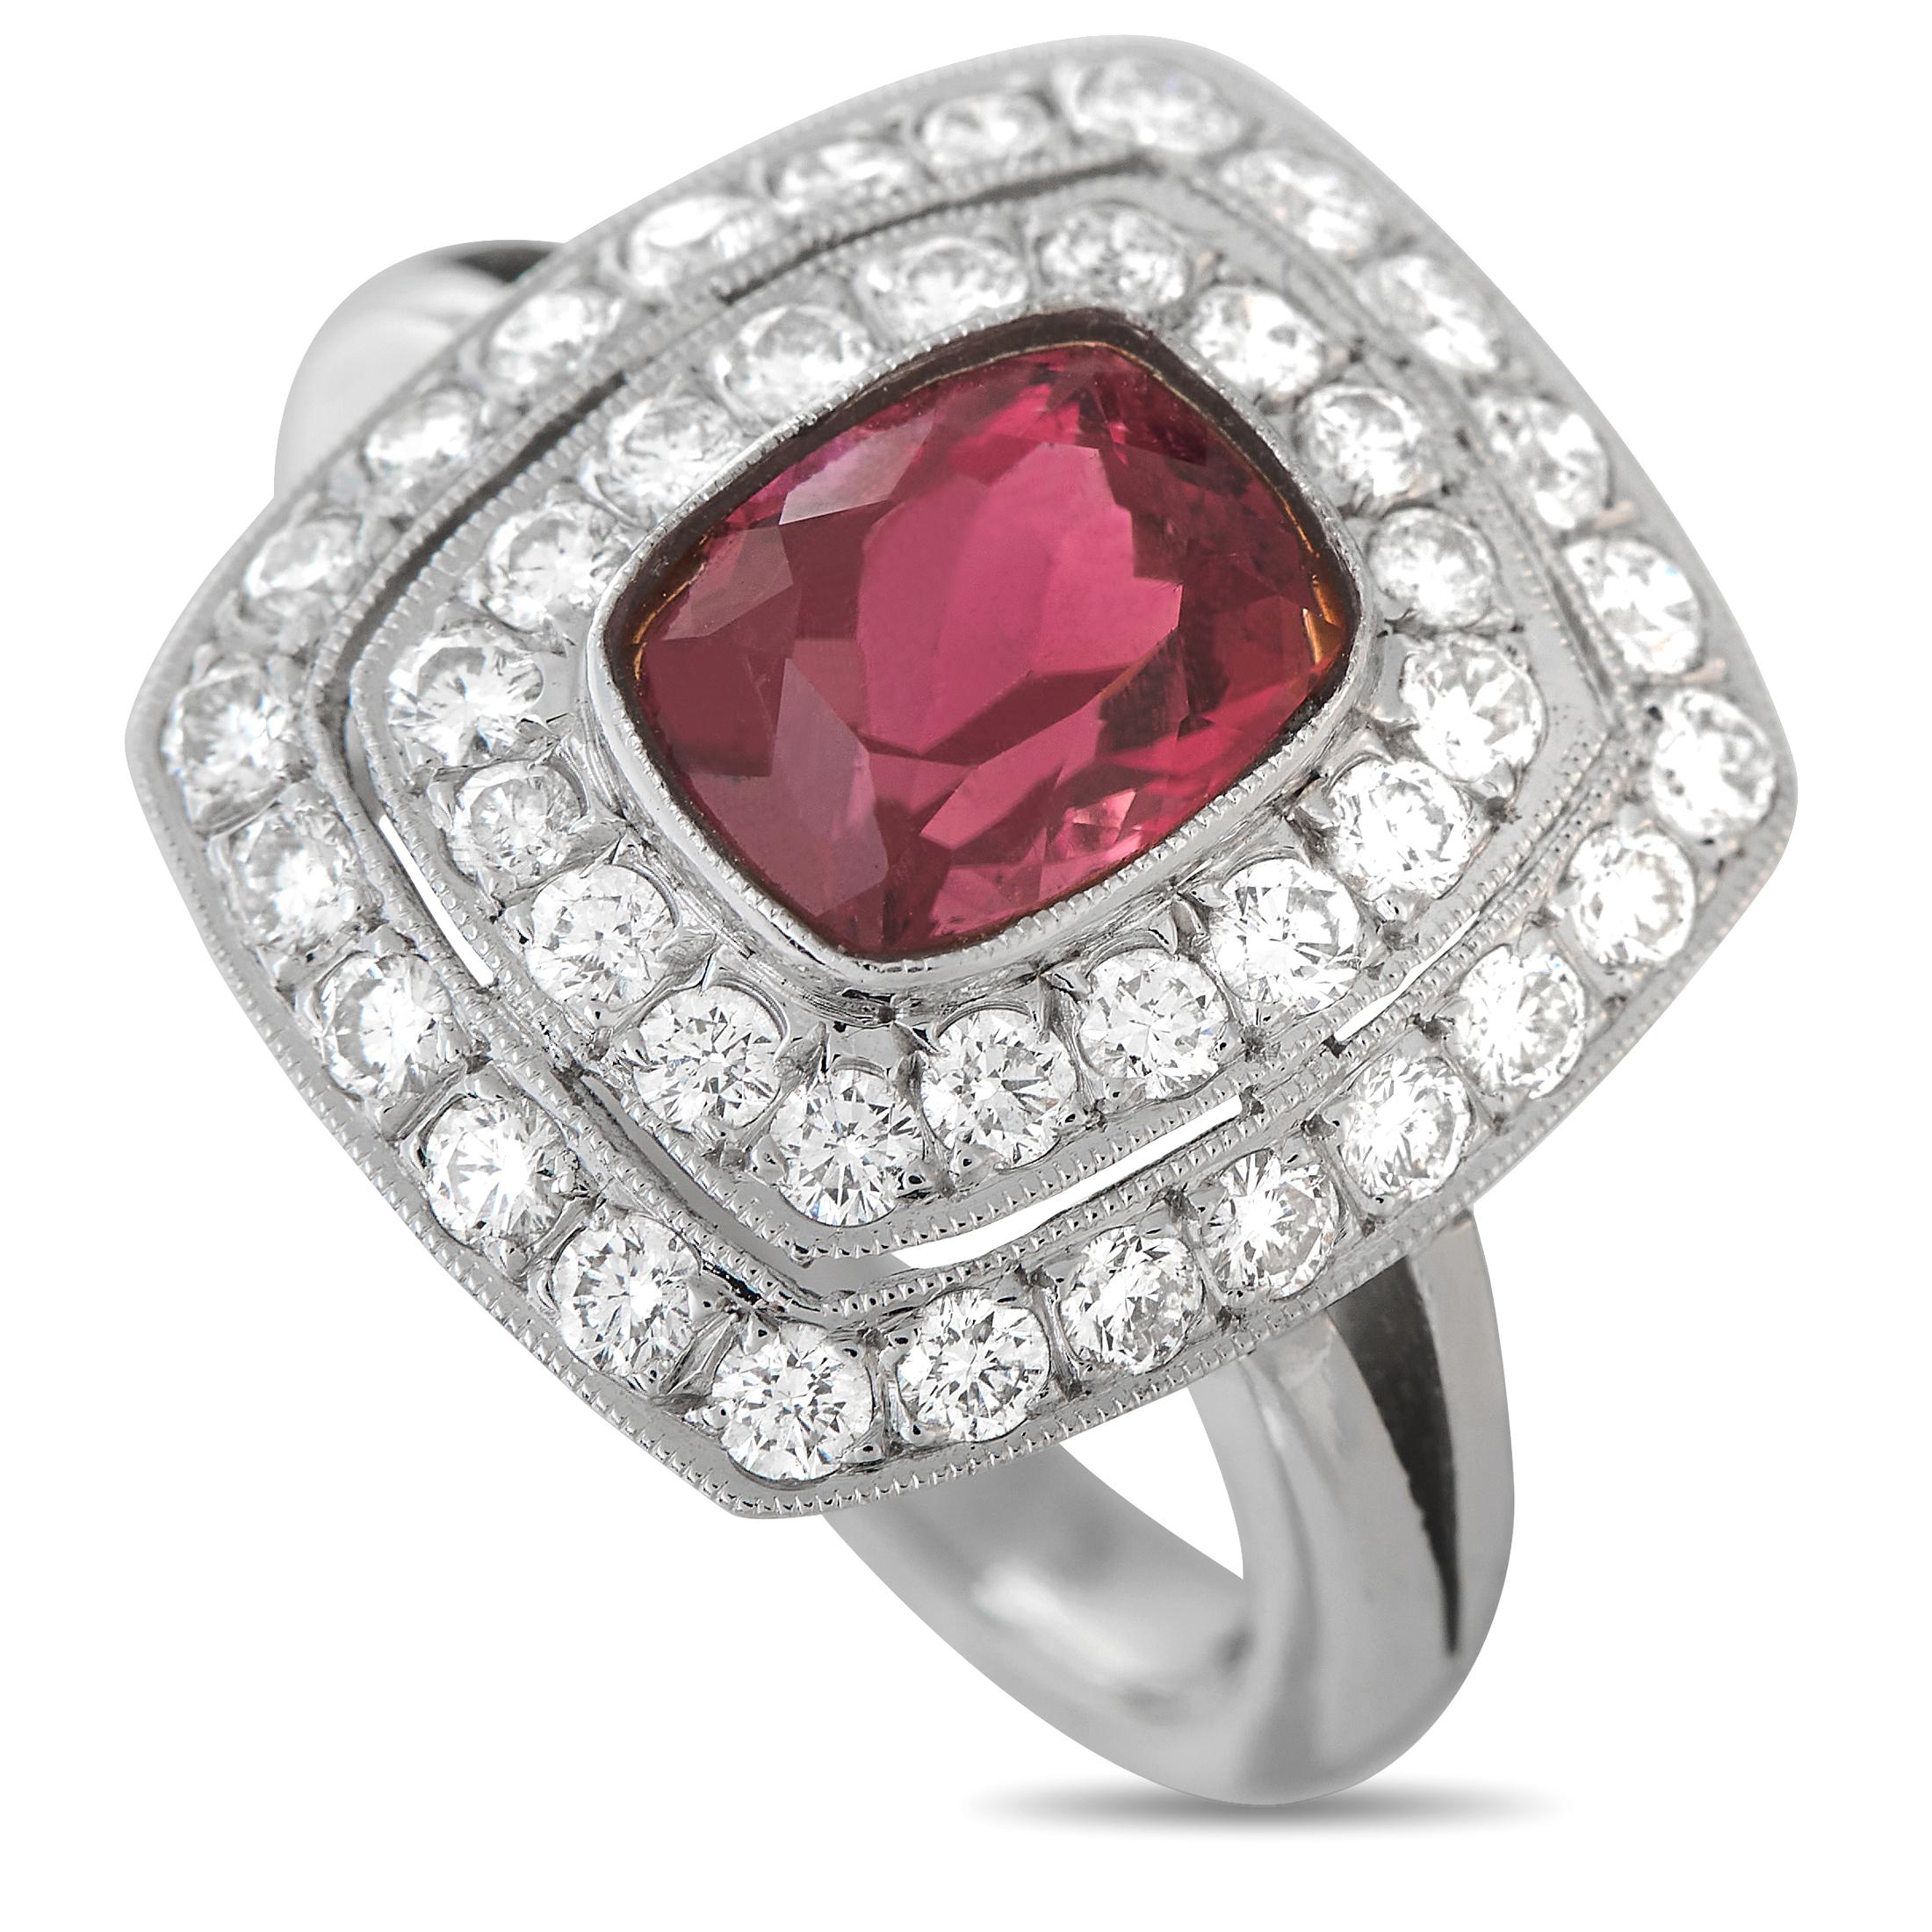 18K White Gold 0.85ct Diamond and Rubellite Ring MF11-012324 In Excellent Condition For Sale In Southampton, PA